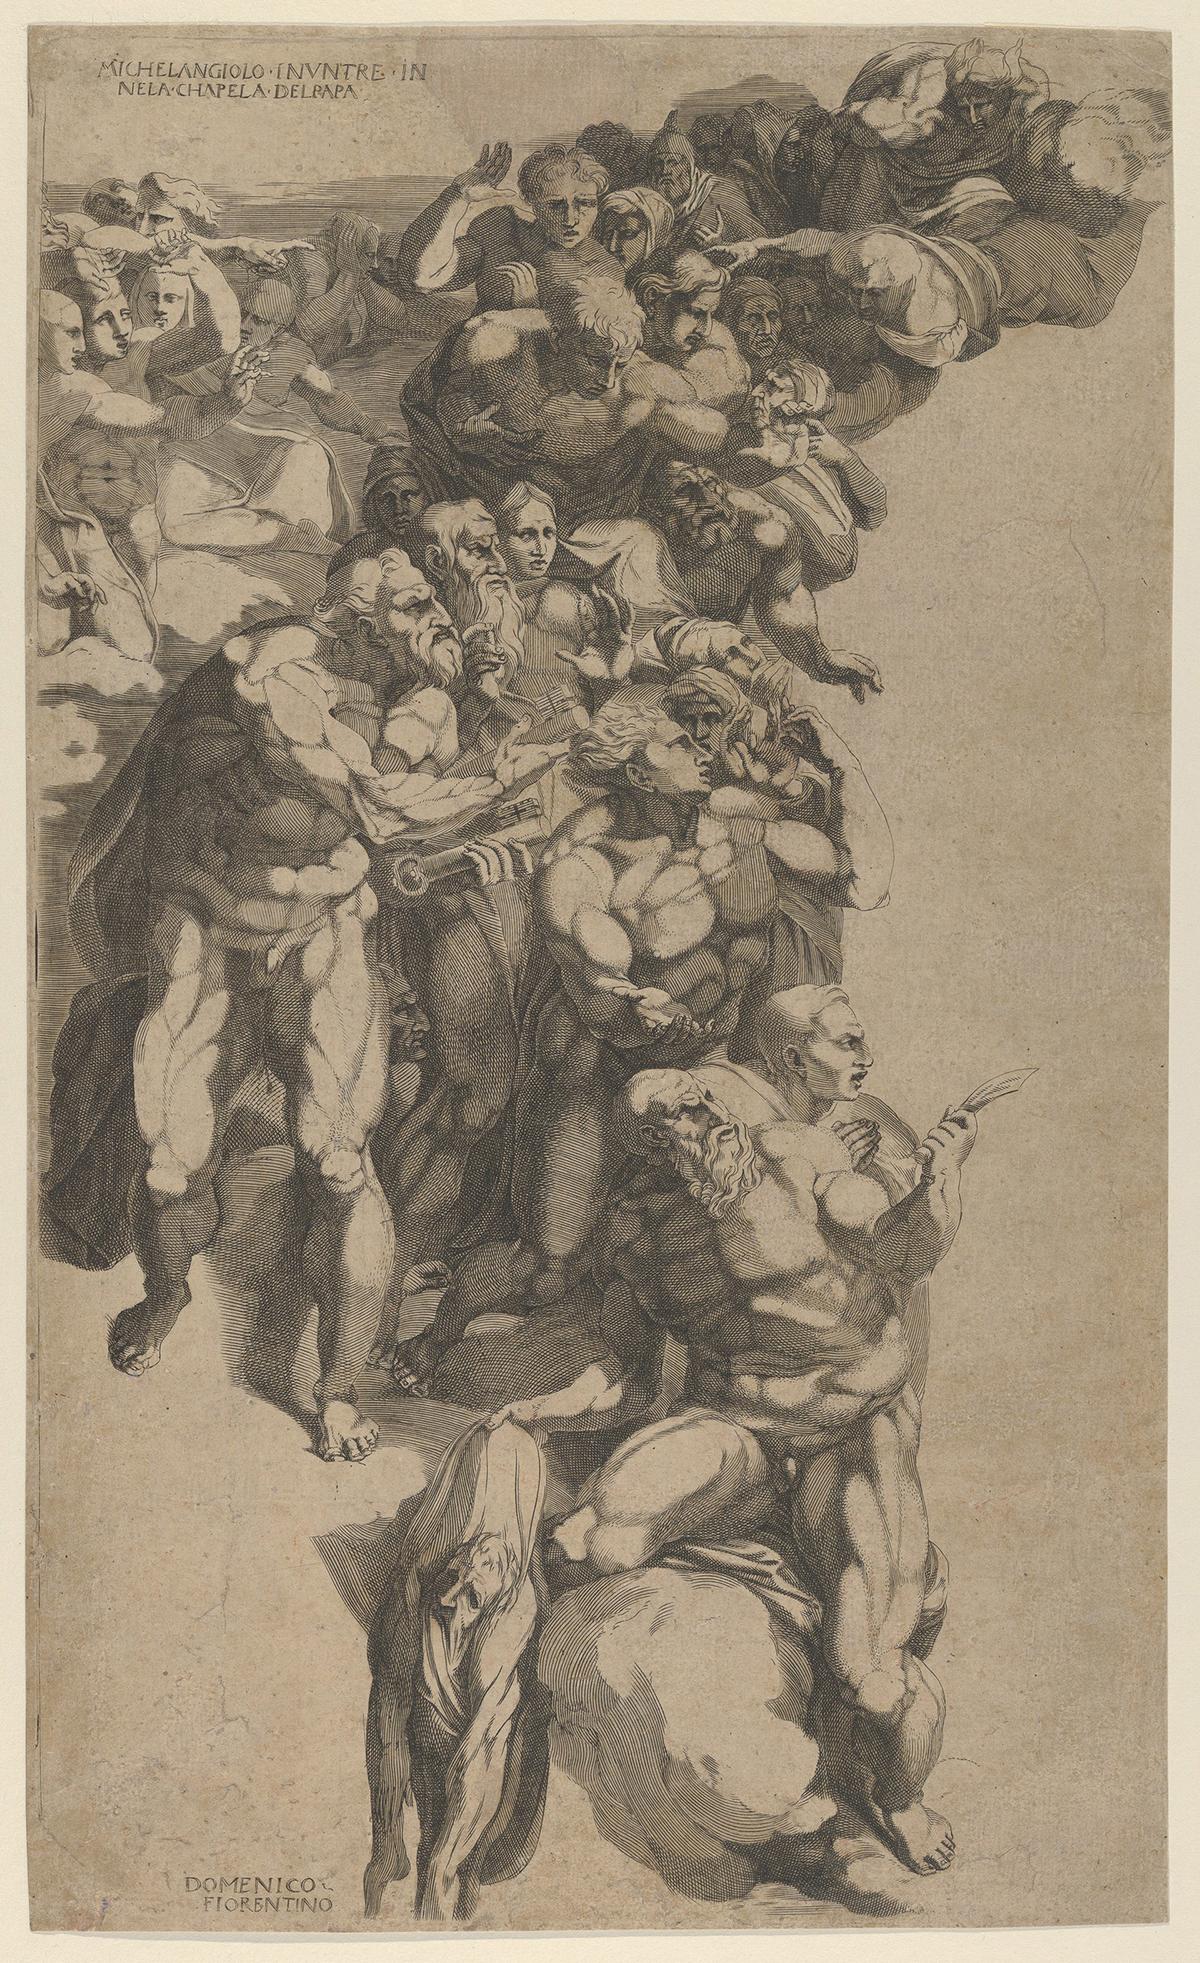 "Group From Last Judgment, St. Bartholomew, St. Peter, and Other Apostles," 1506–1565, by Domenico del Barbiere after Michelangelo. Engraving; 14 3/4 inches by 8 7/8 inches. Metropolitan Museum of Art, New York City. (Public Domain)